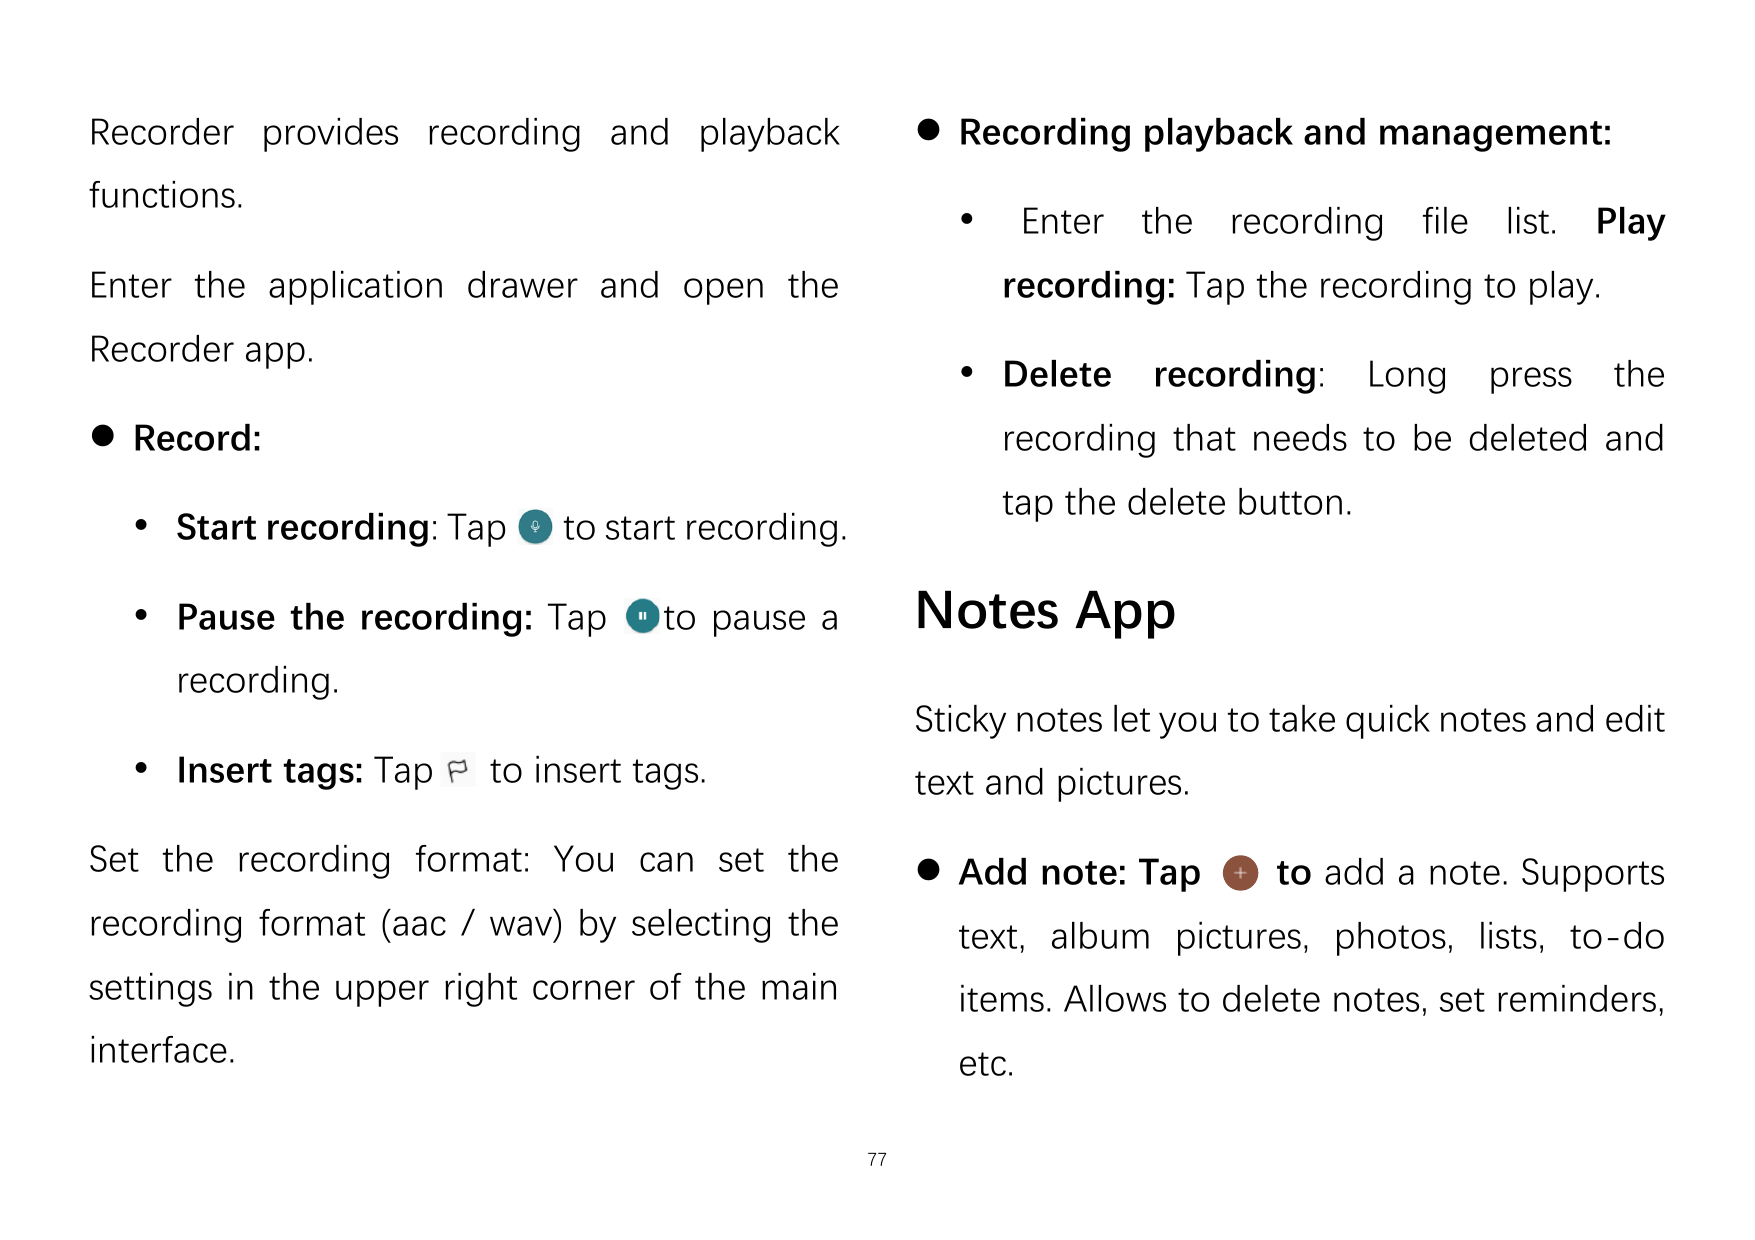 ⚫ Recording playback and management:Recorder provides recording and playbackfunctions.Enter the application drawer and open the